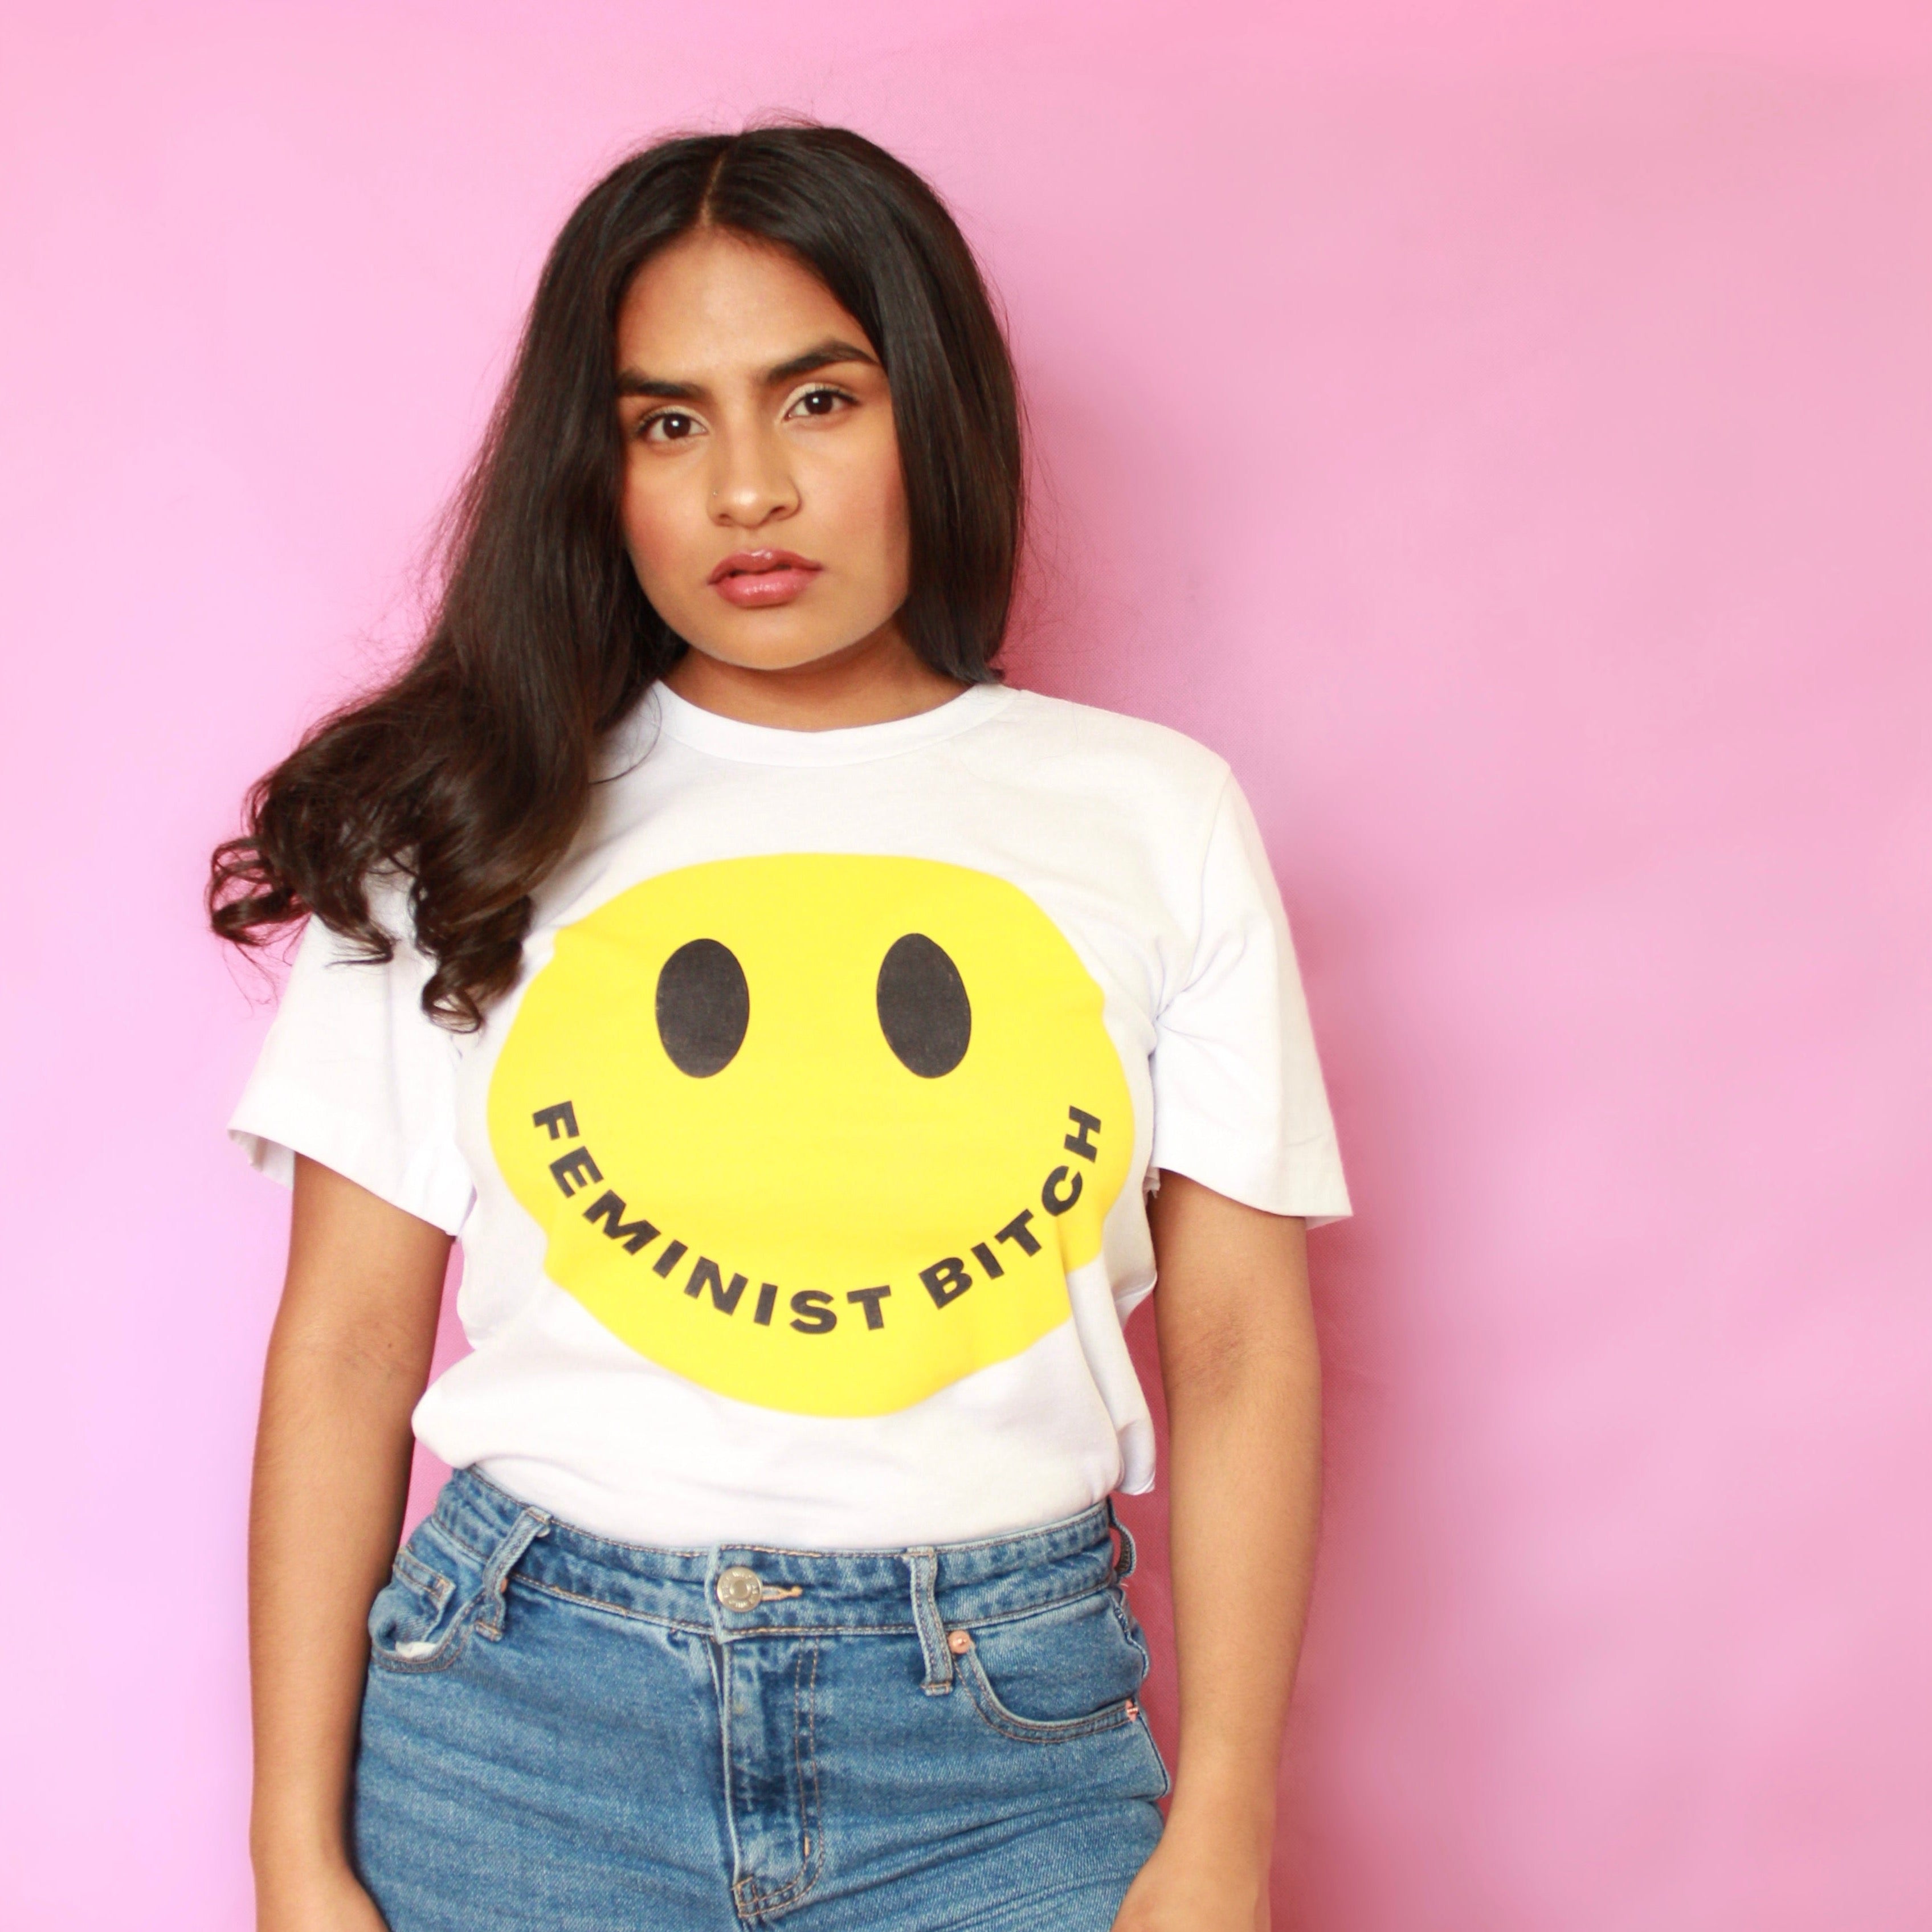 Empowering white feminist shirt featuring the message "Feminist Bitch" with a yellow smiley face